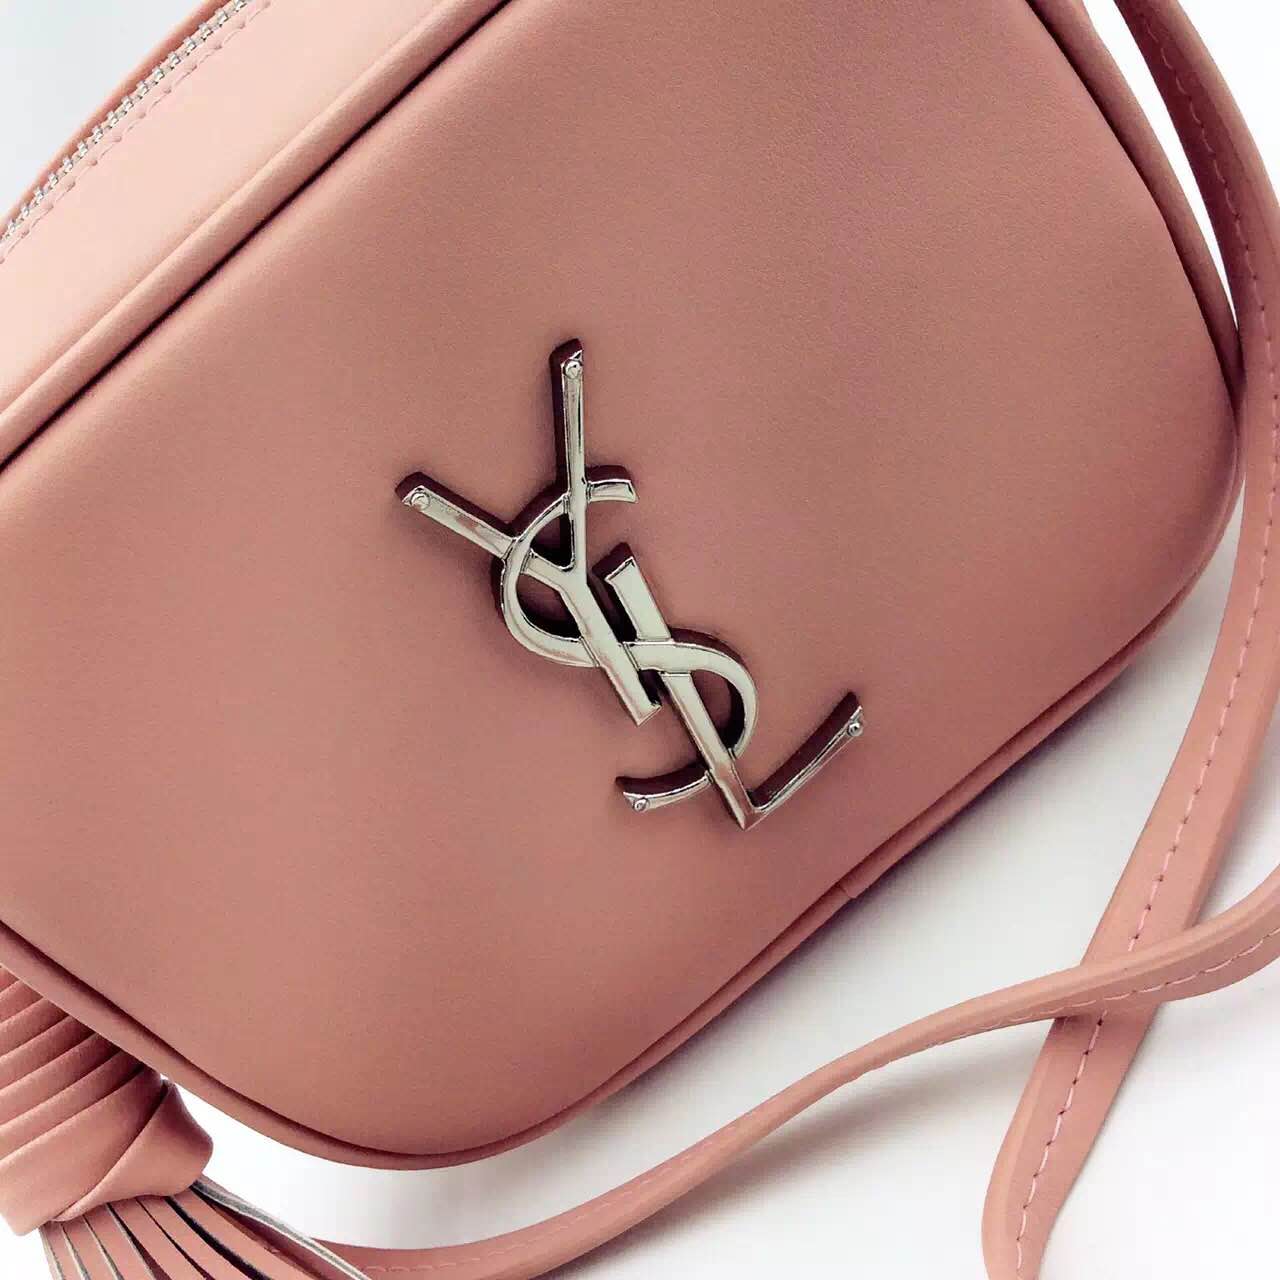 New Arrival!2016 Cheap YSL Out Sale with Free Shipping-Saint Laurent Monogram Medium Blogger Bag in Pink Leather - Click Image to Close